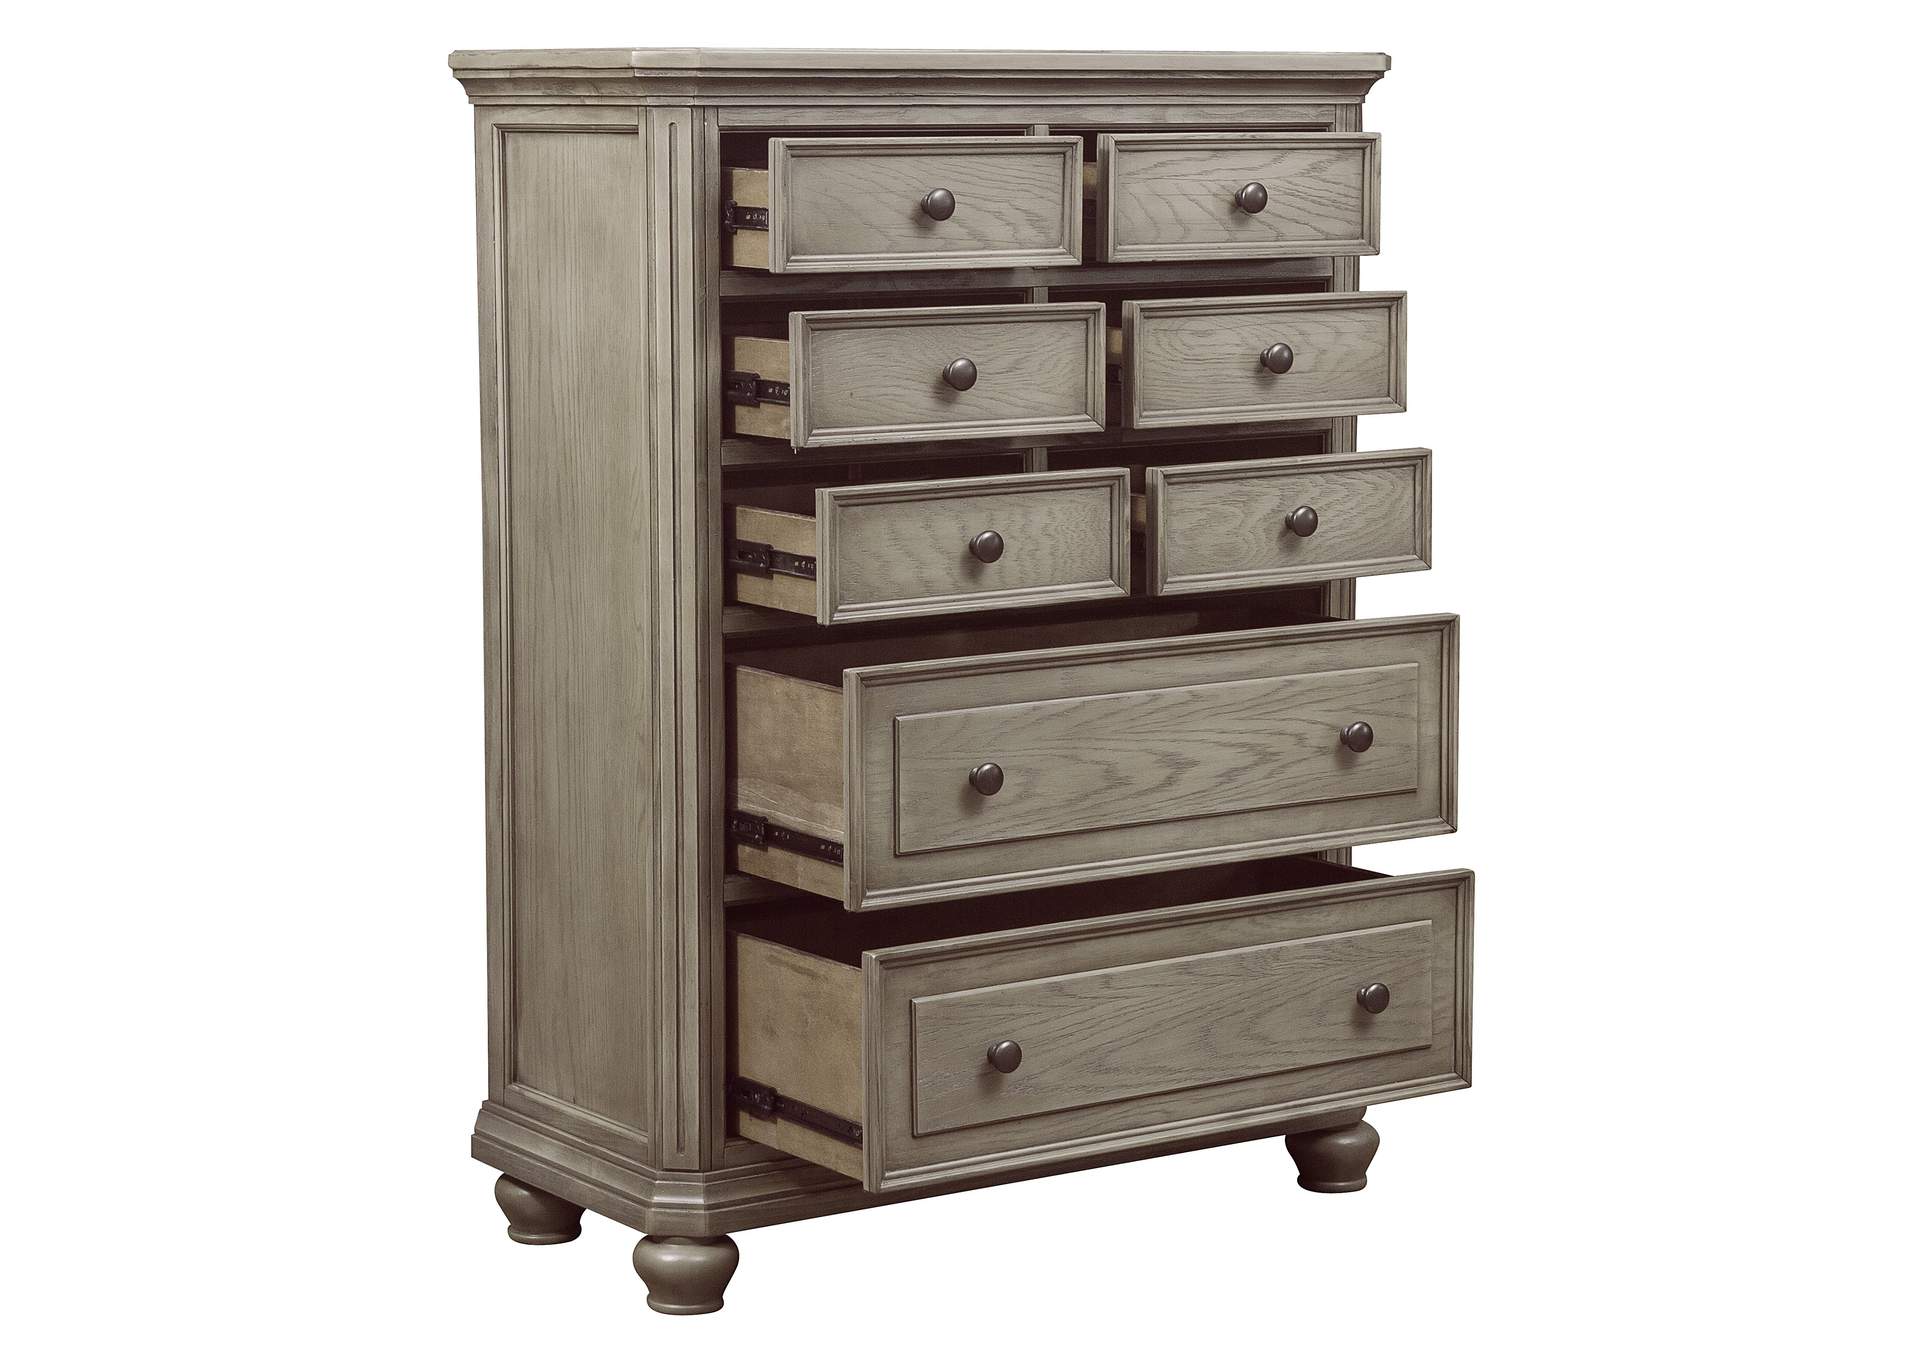 Lavonia Ash Chest,Homelegance